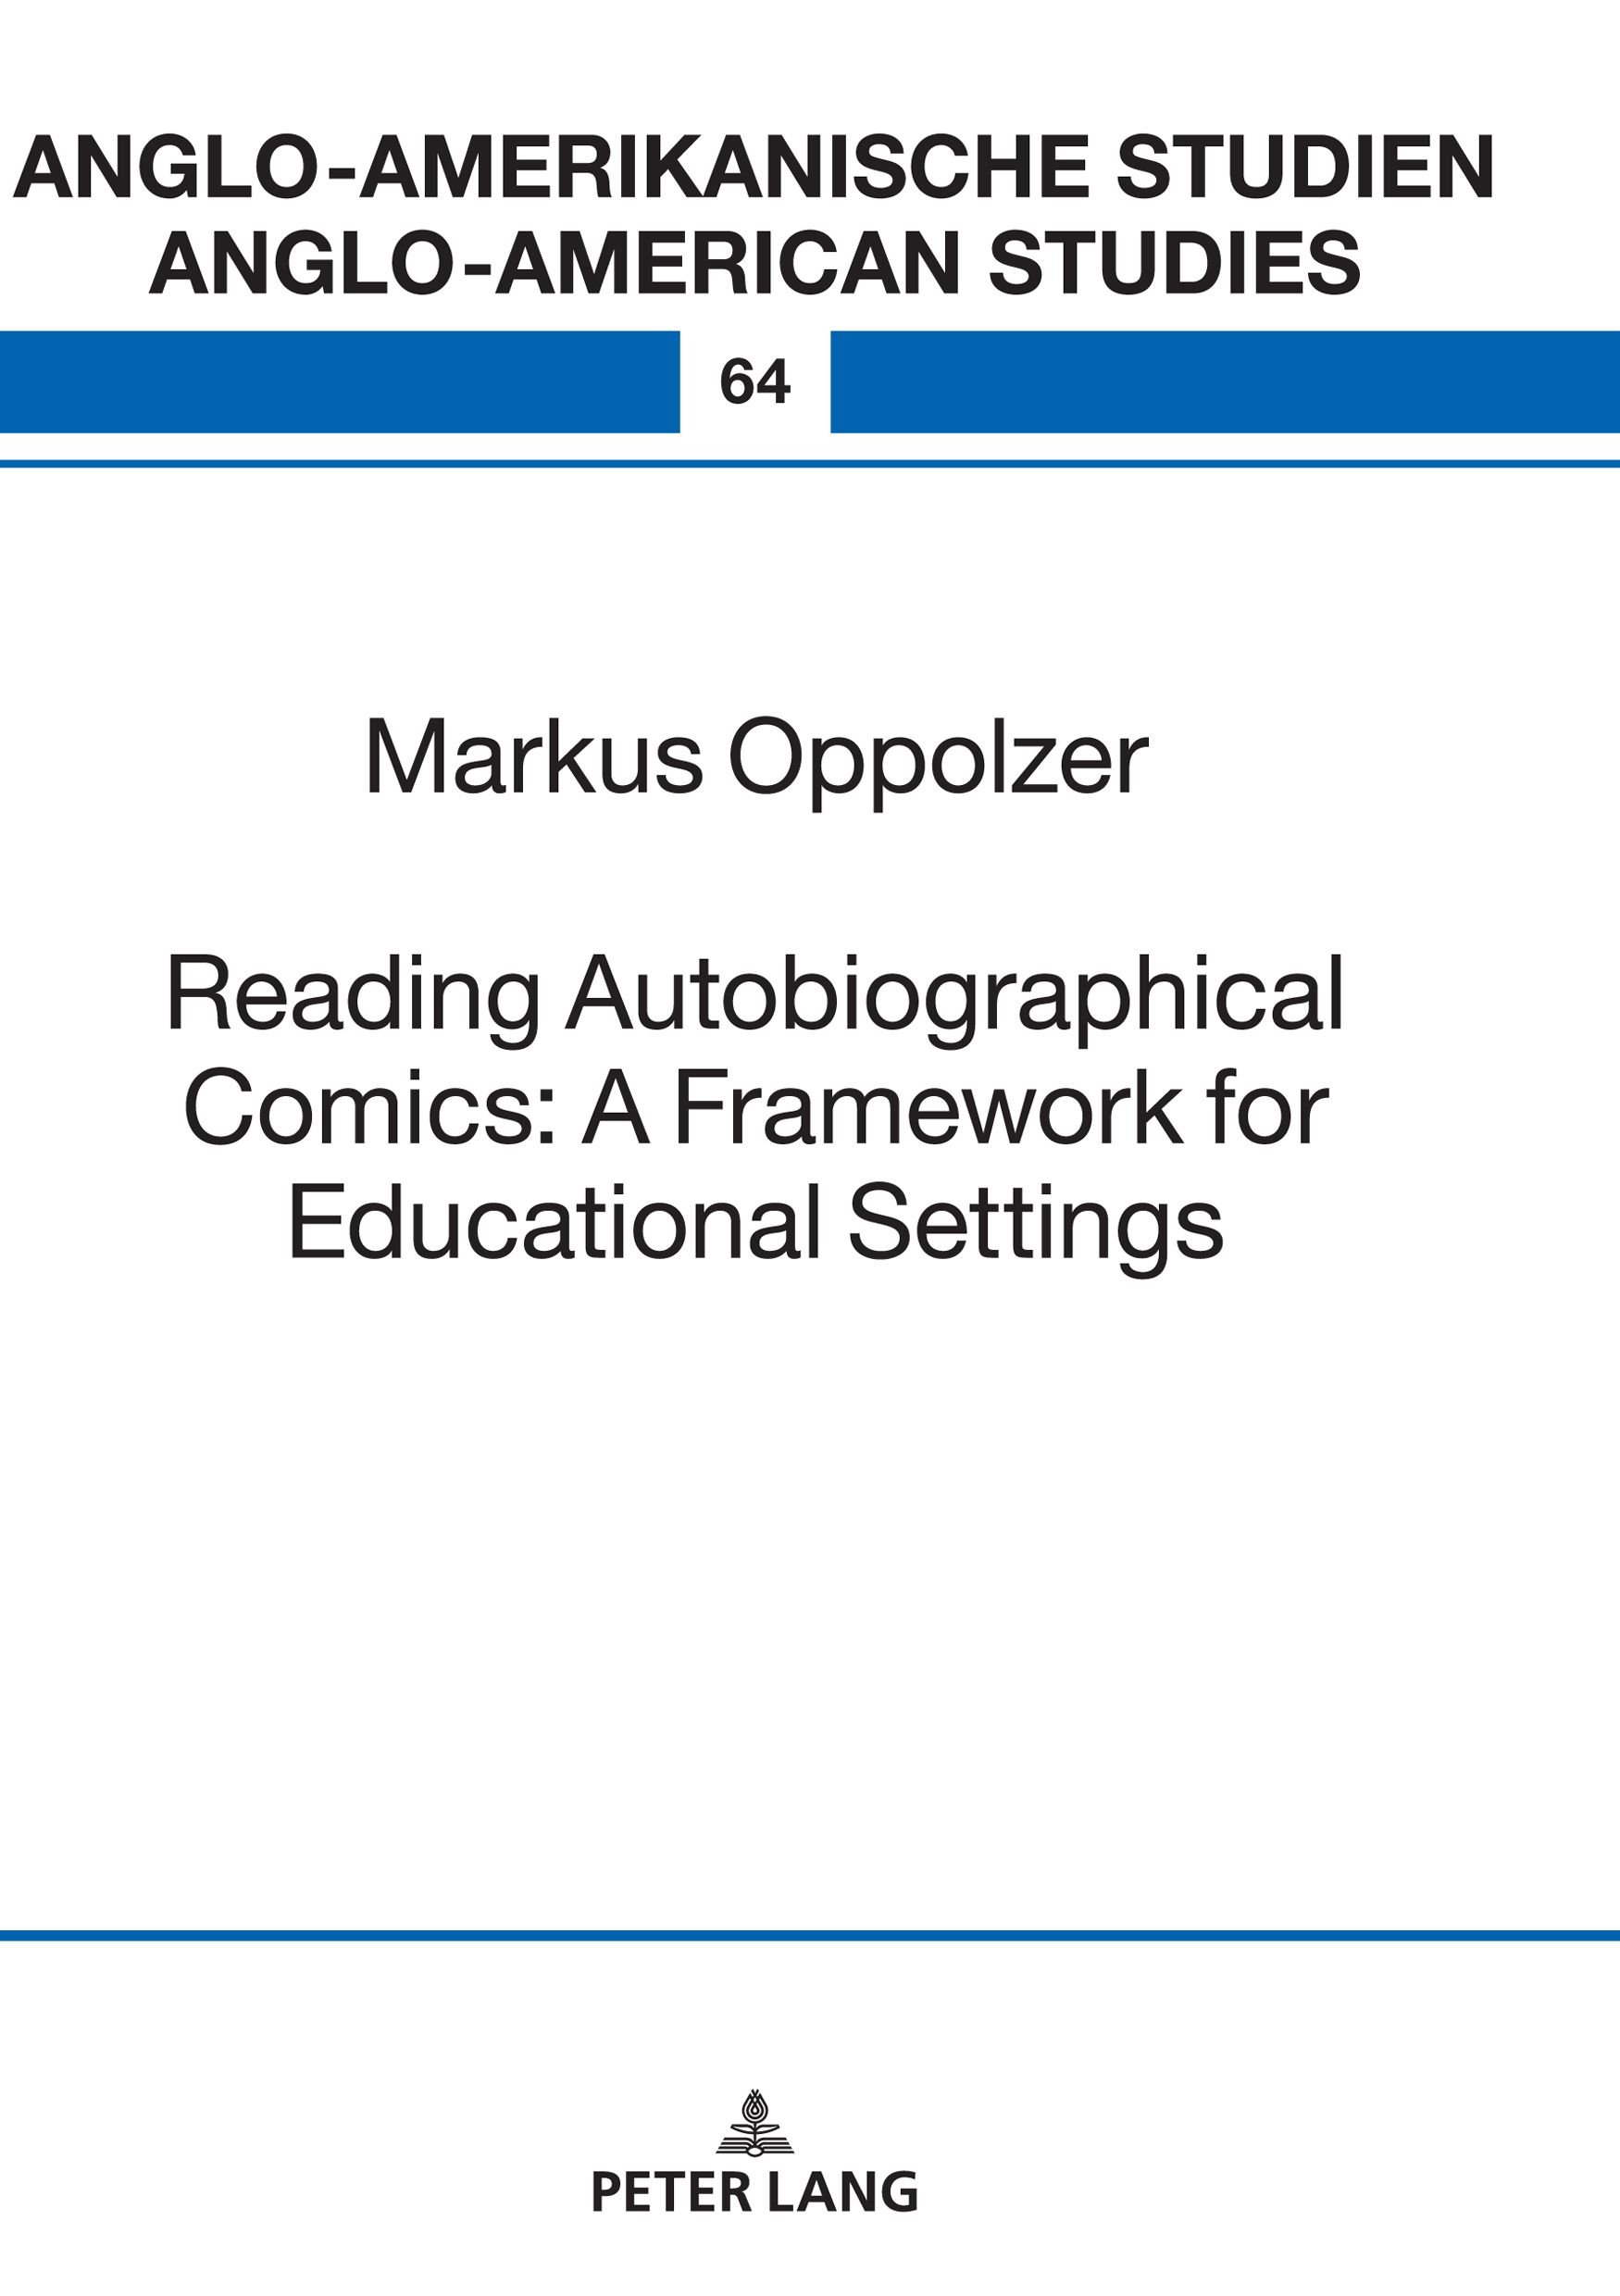 2020: Reading Autobiographical Comics: A Framework for Educational Settings